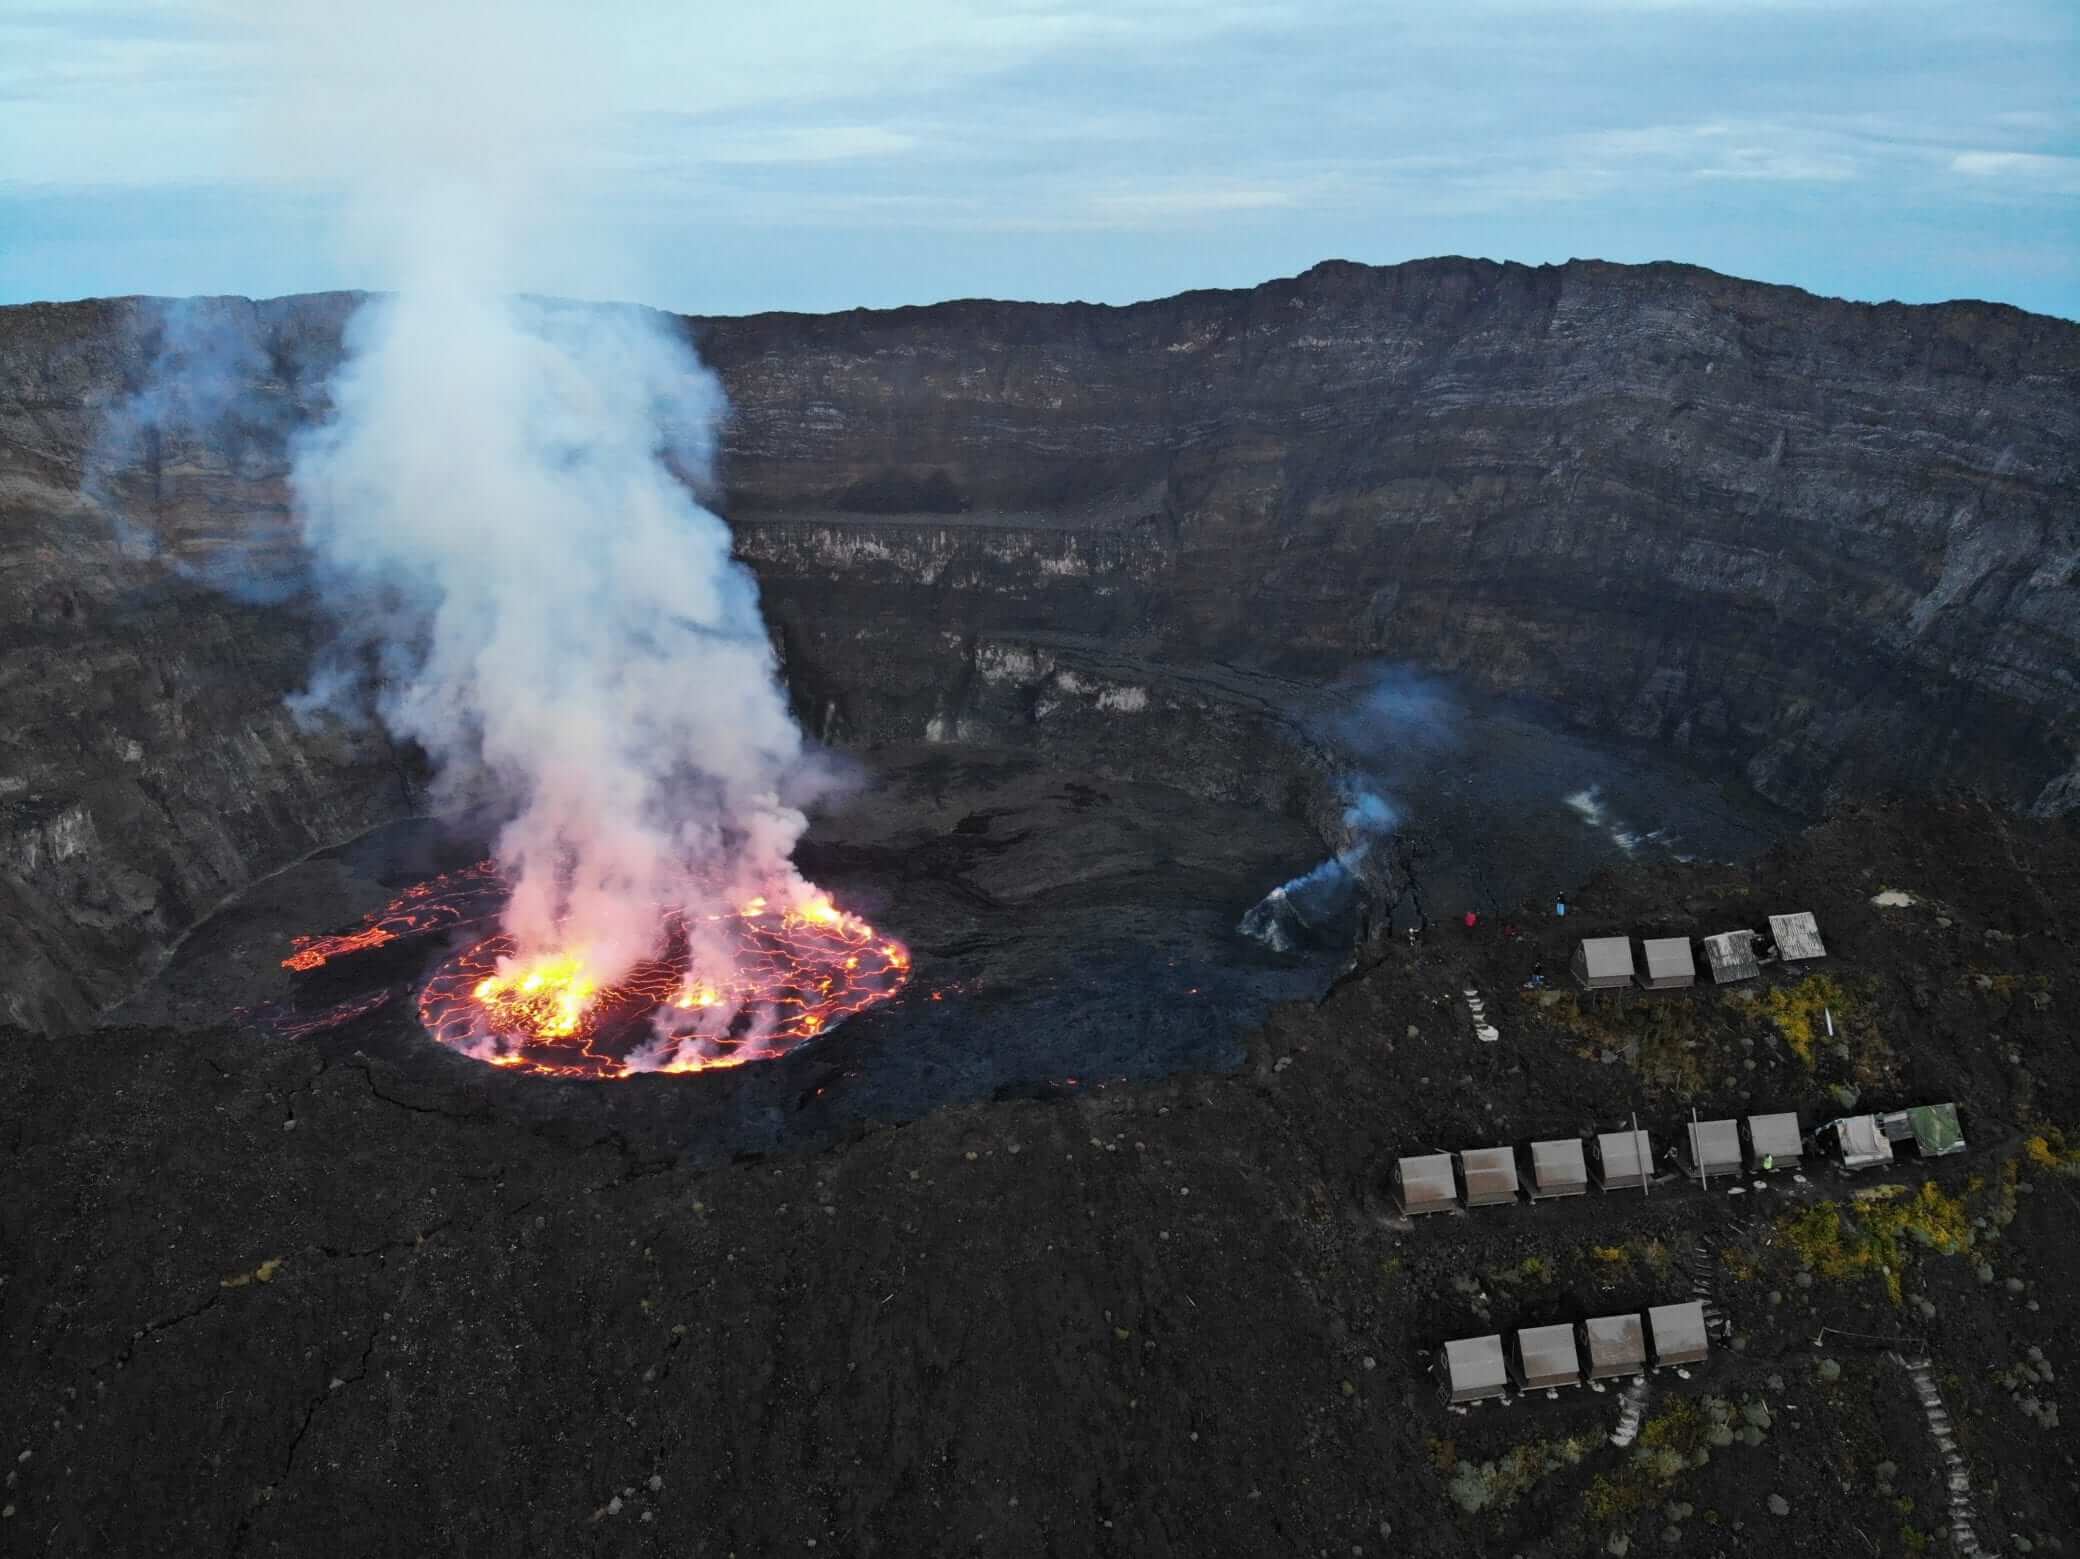 Nyiragongo Crater & the Crater Huts viewed from above